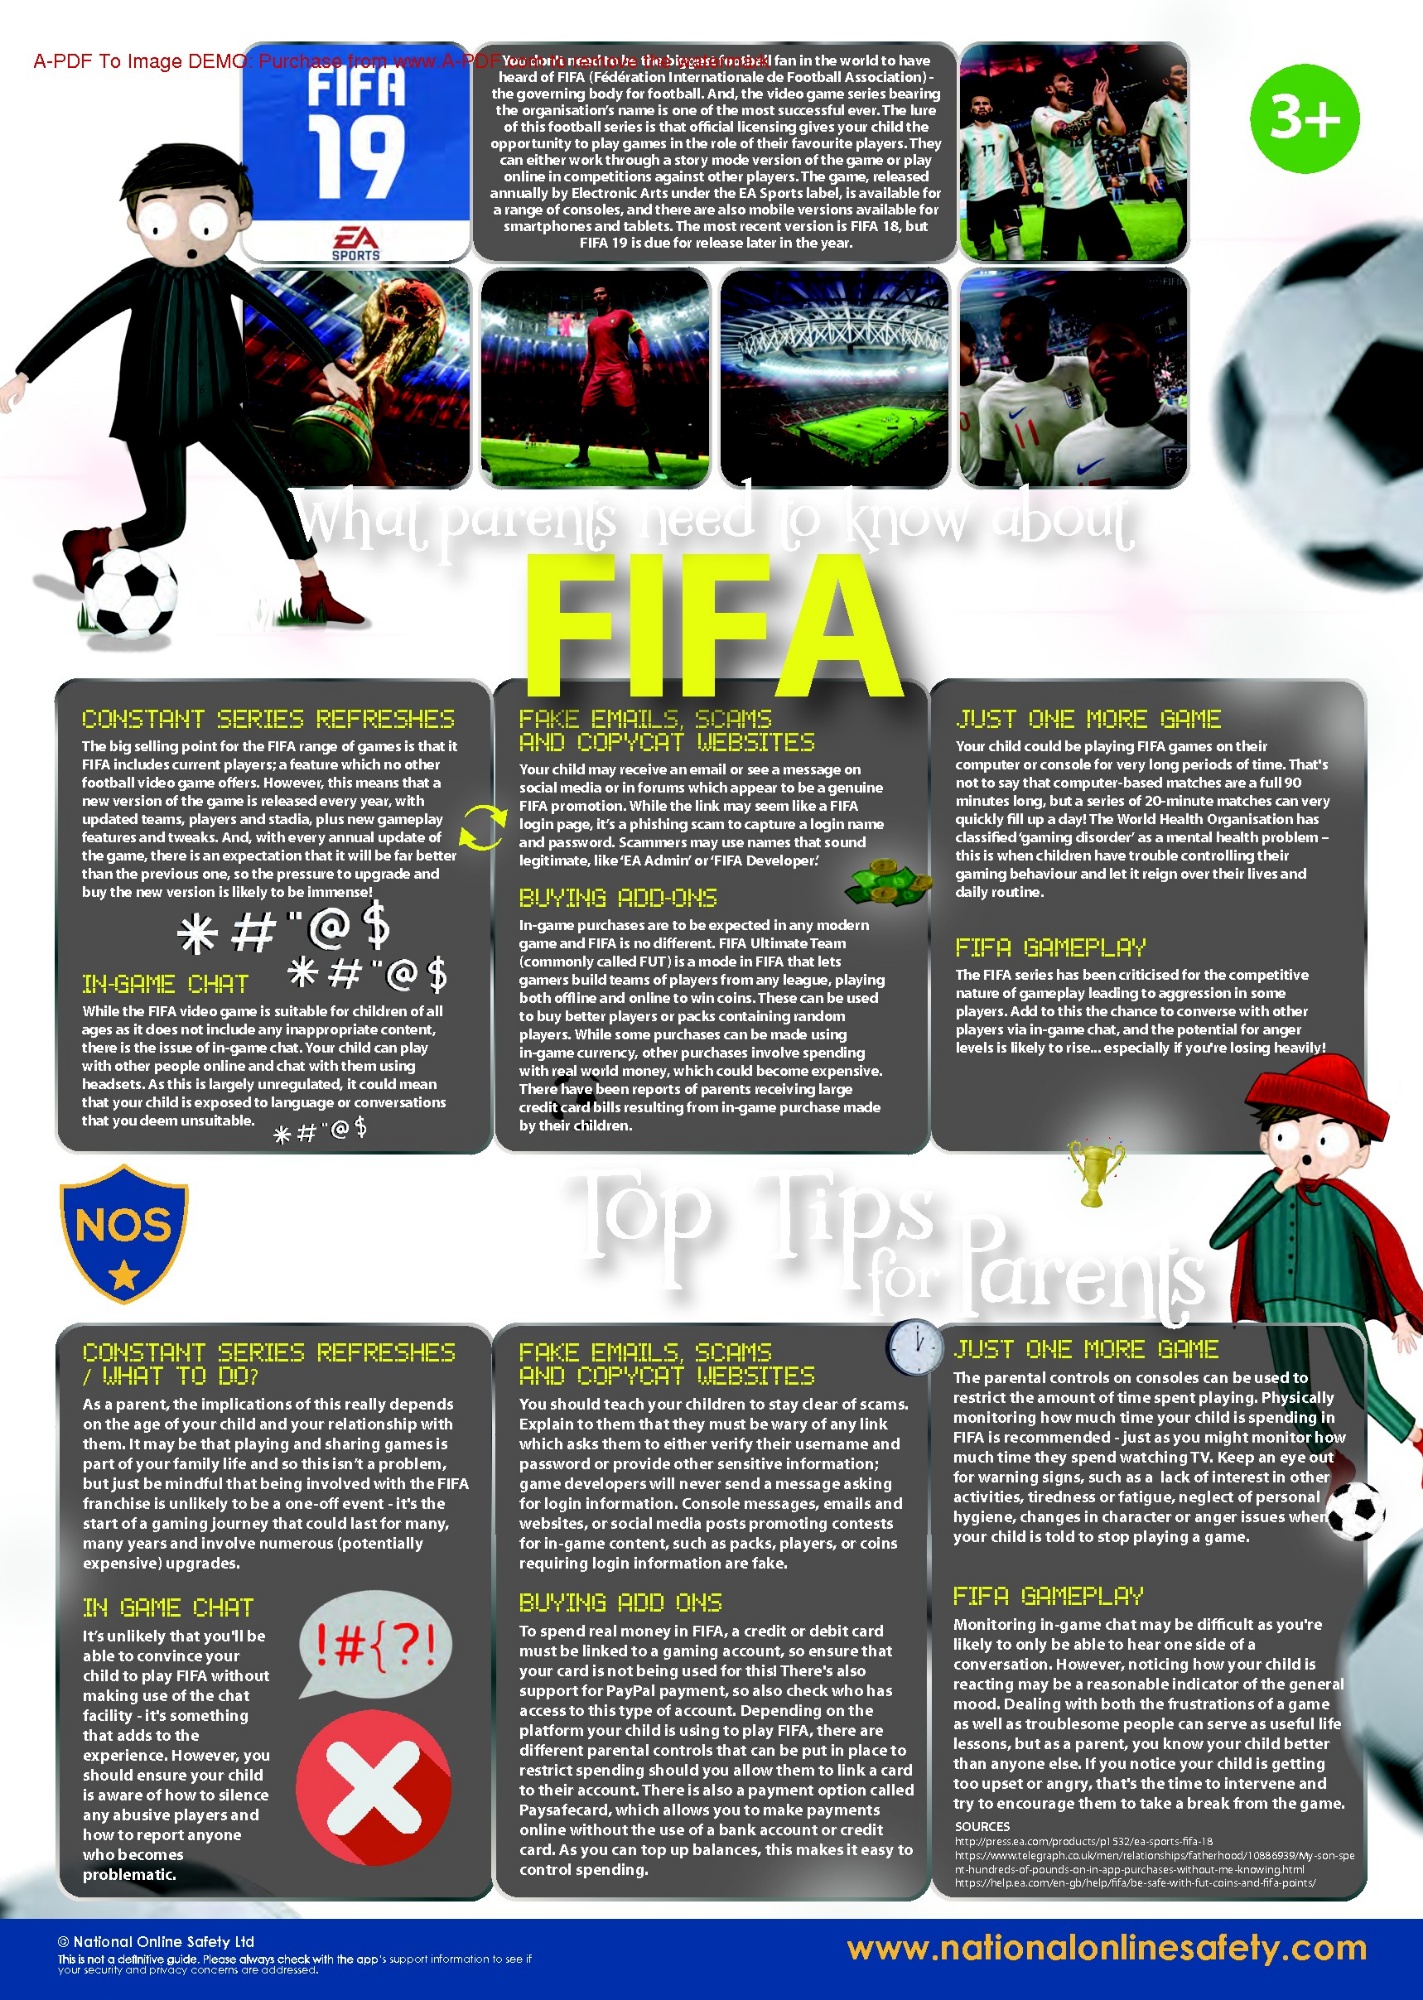 The FIFA Playbook - A Guide for Parents and Carers - Safer Schools